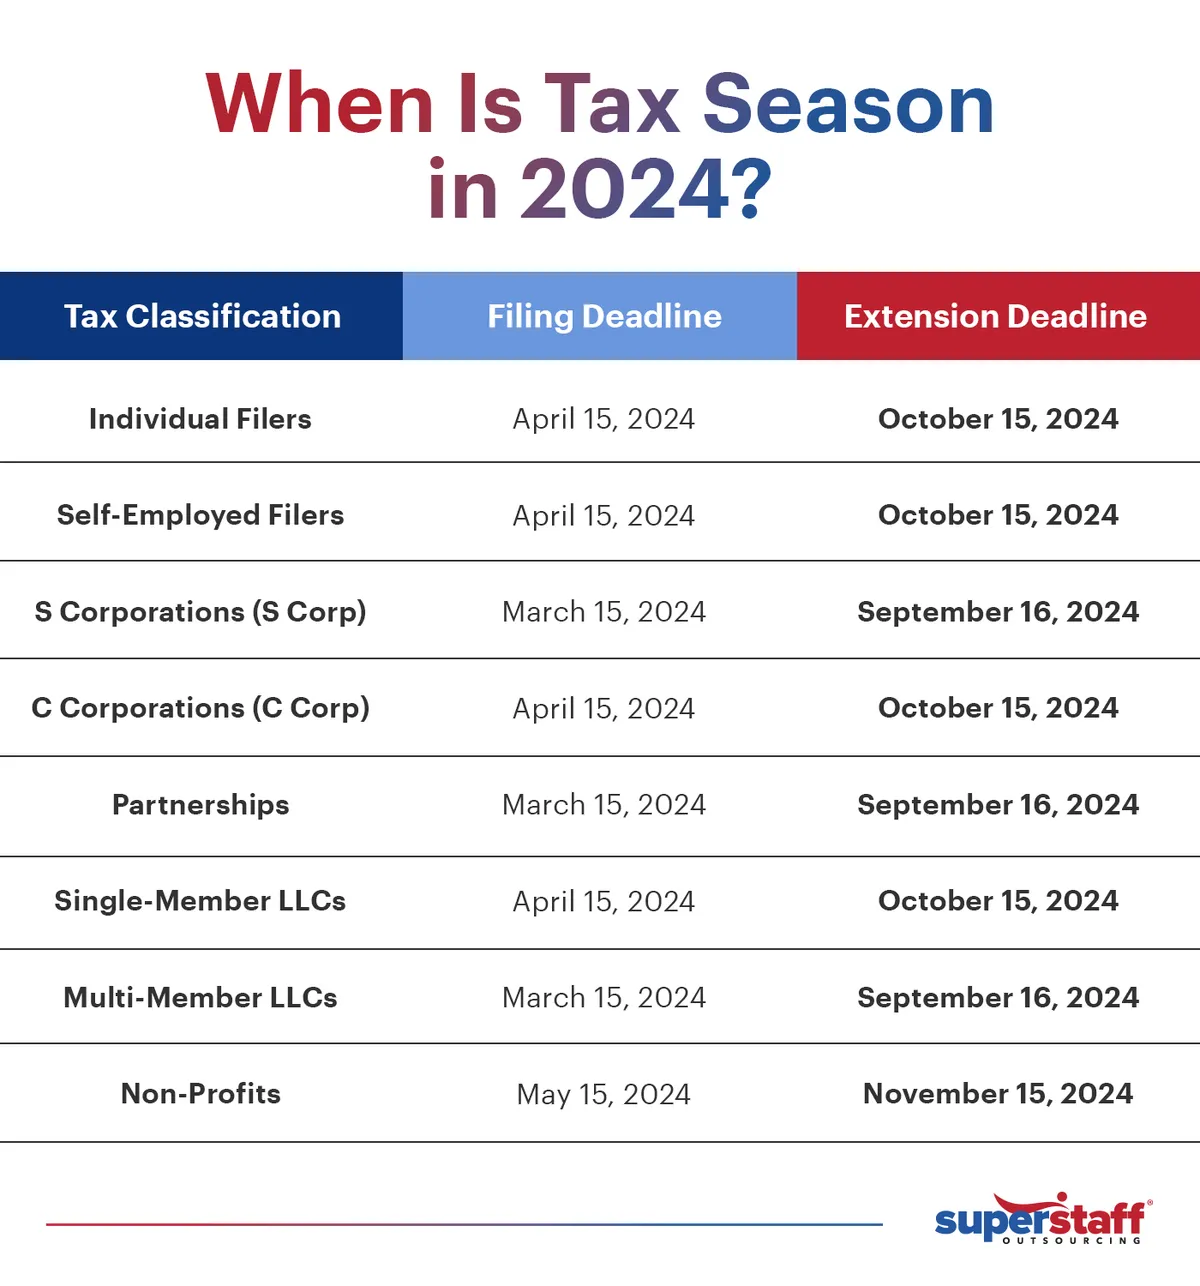 A mini infographic shows deadlines for start ups and corporations for tax season 2024.